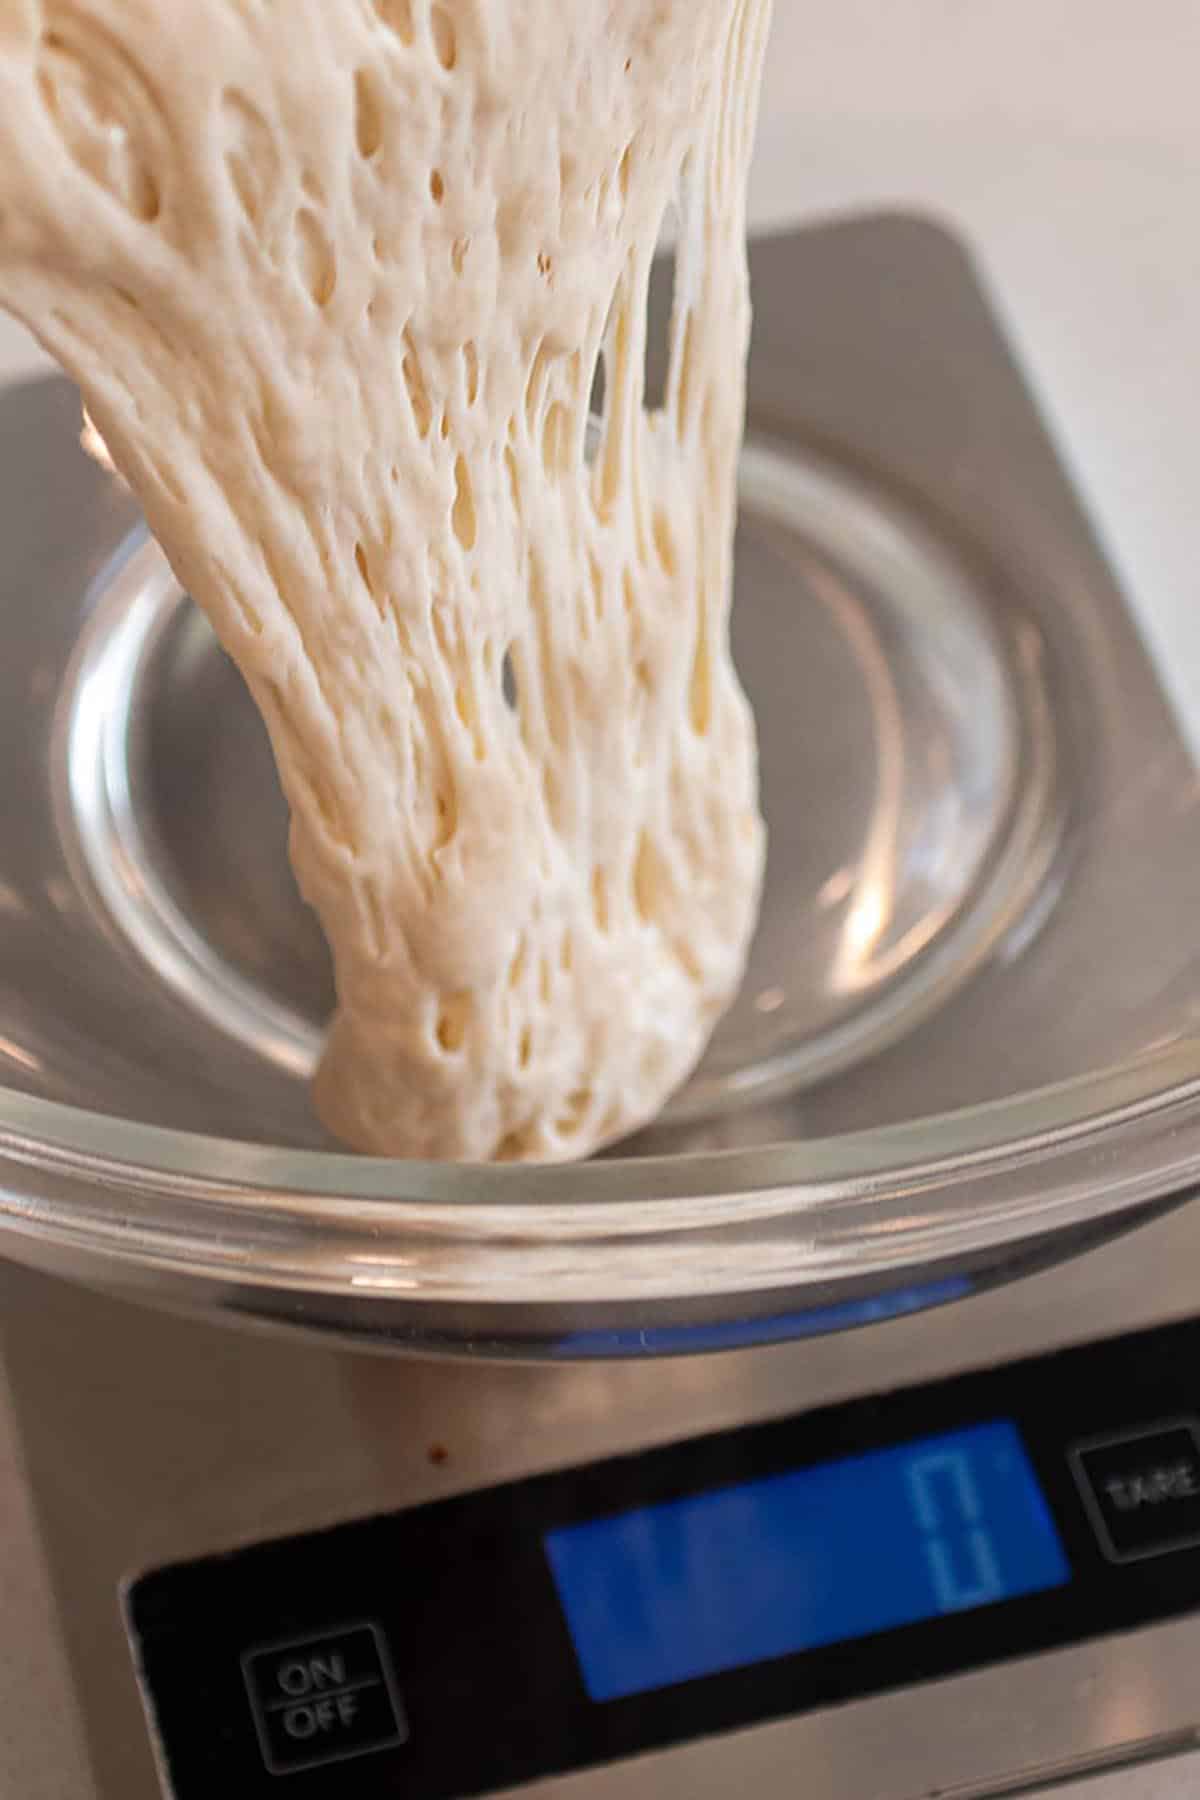 Sourdough starter being poured into an empty glass bowl on a zeroed out digital scale.